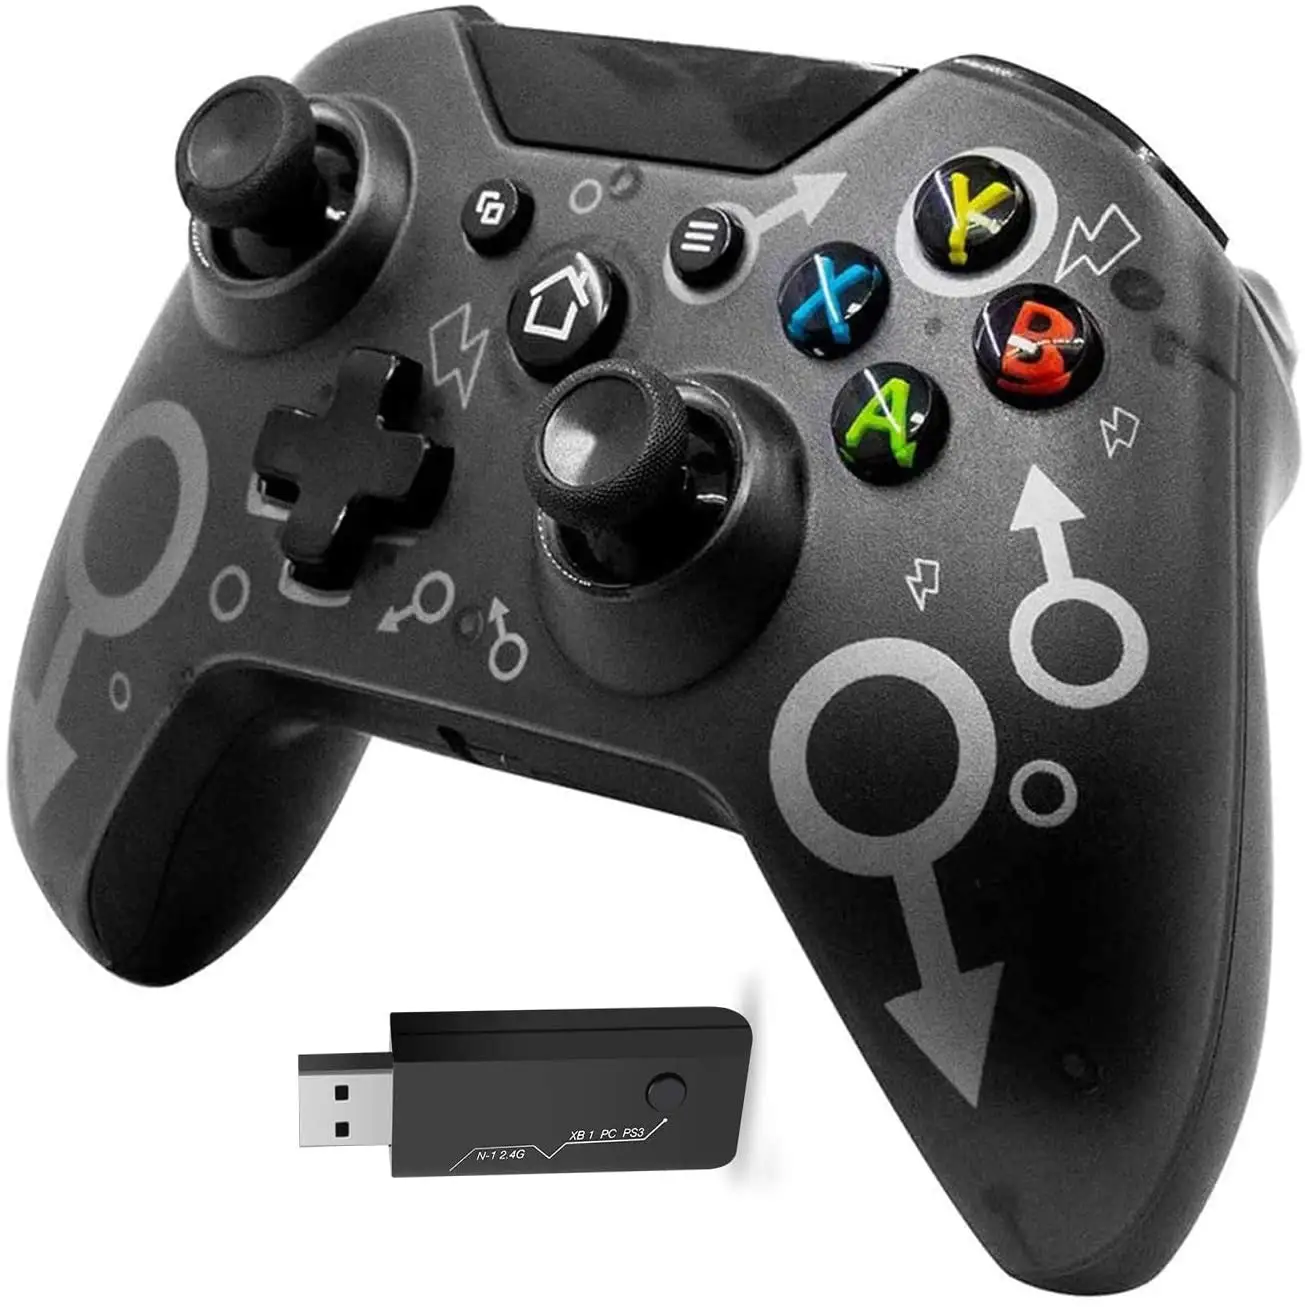 2.4Ghz Draadloze Controller Dual Vibration Gamepad Voor Xbox One/One S/One X/PS3/Windows pc 7/8/8.1/10